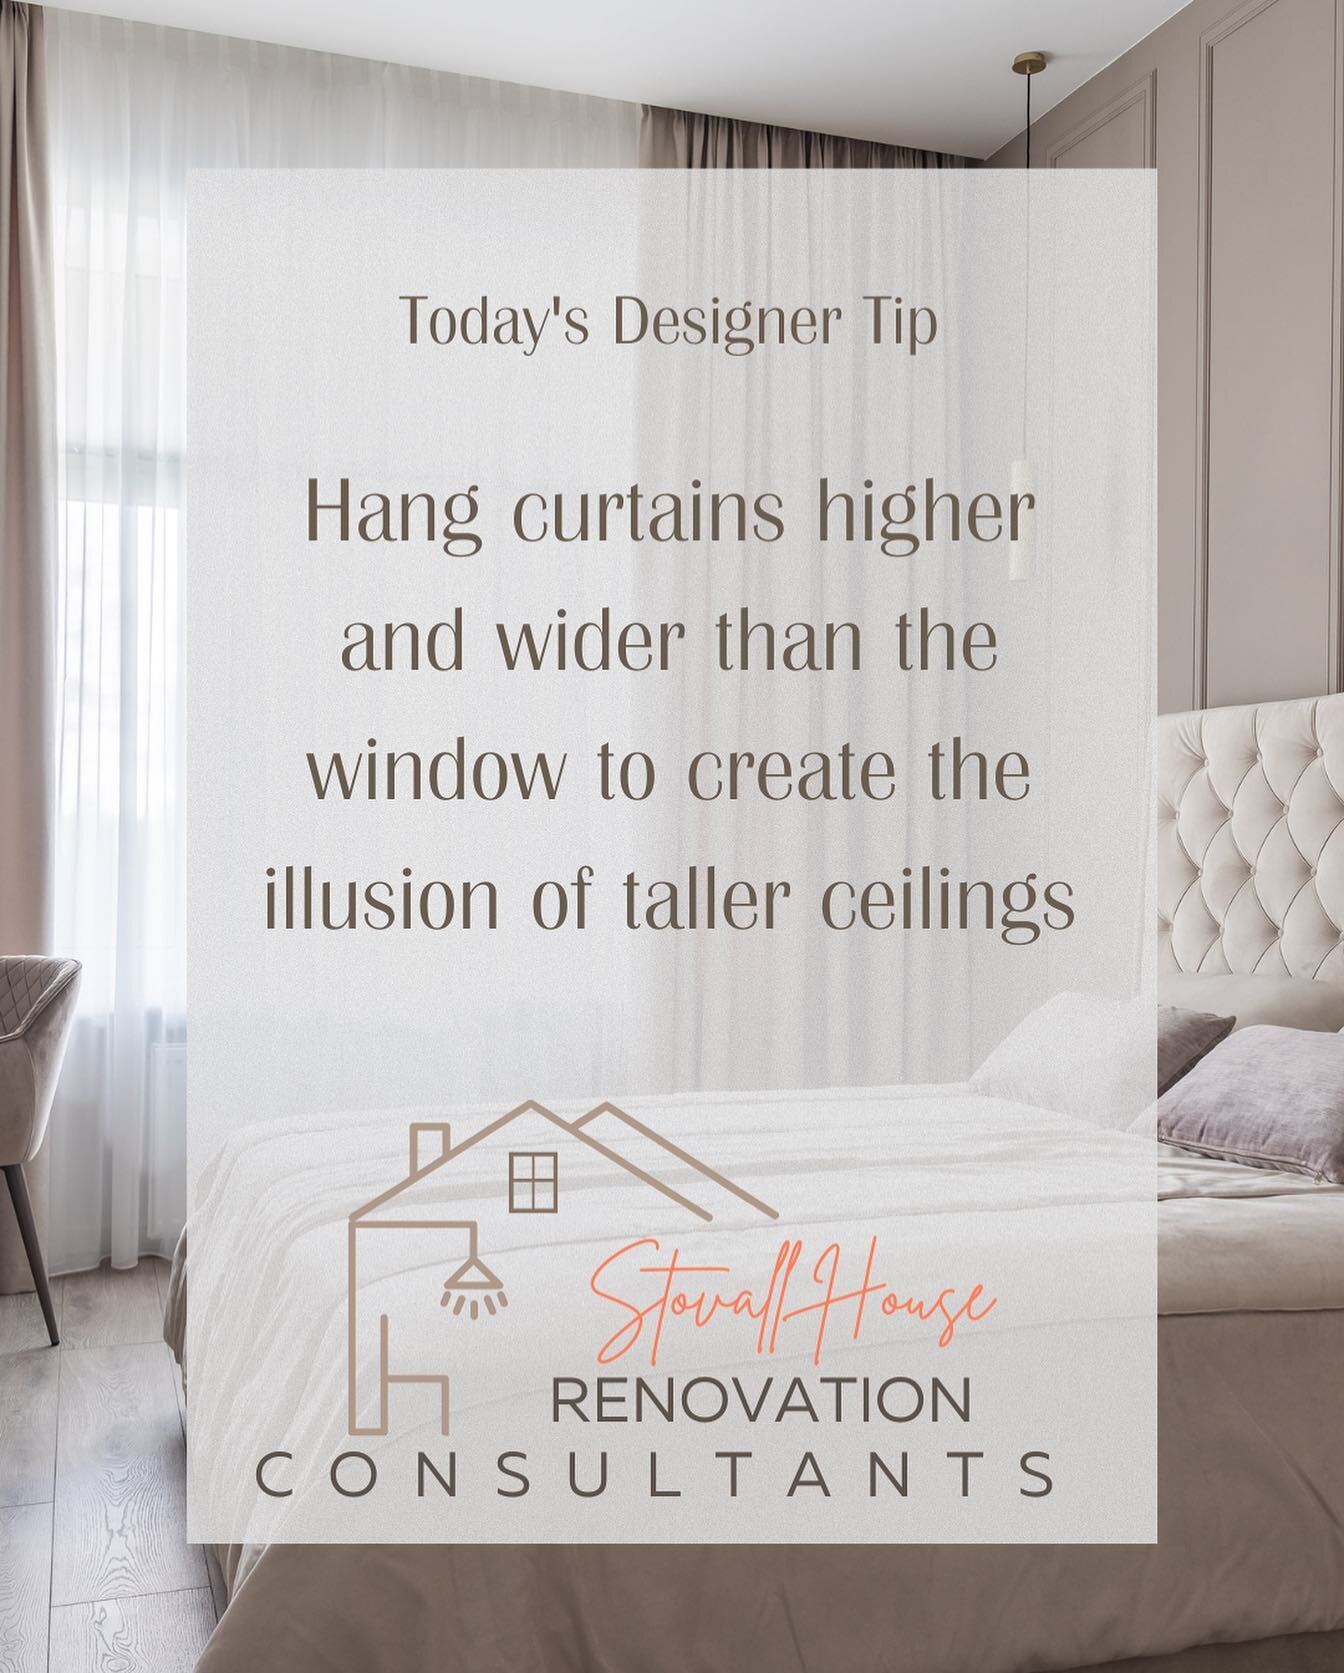 Hanging curtains high and wide can make a room look larger and more stylish. By hanging them higher than the window and wider than the frame, you can create the illusion of higher ceilings and a larger window. This can also allow more natural light t